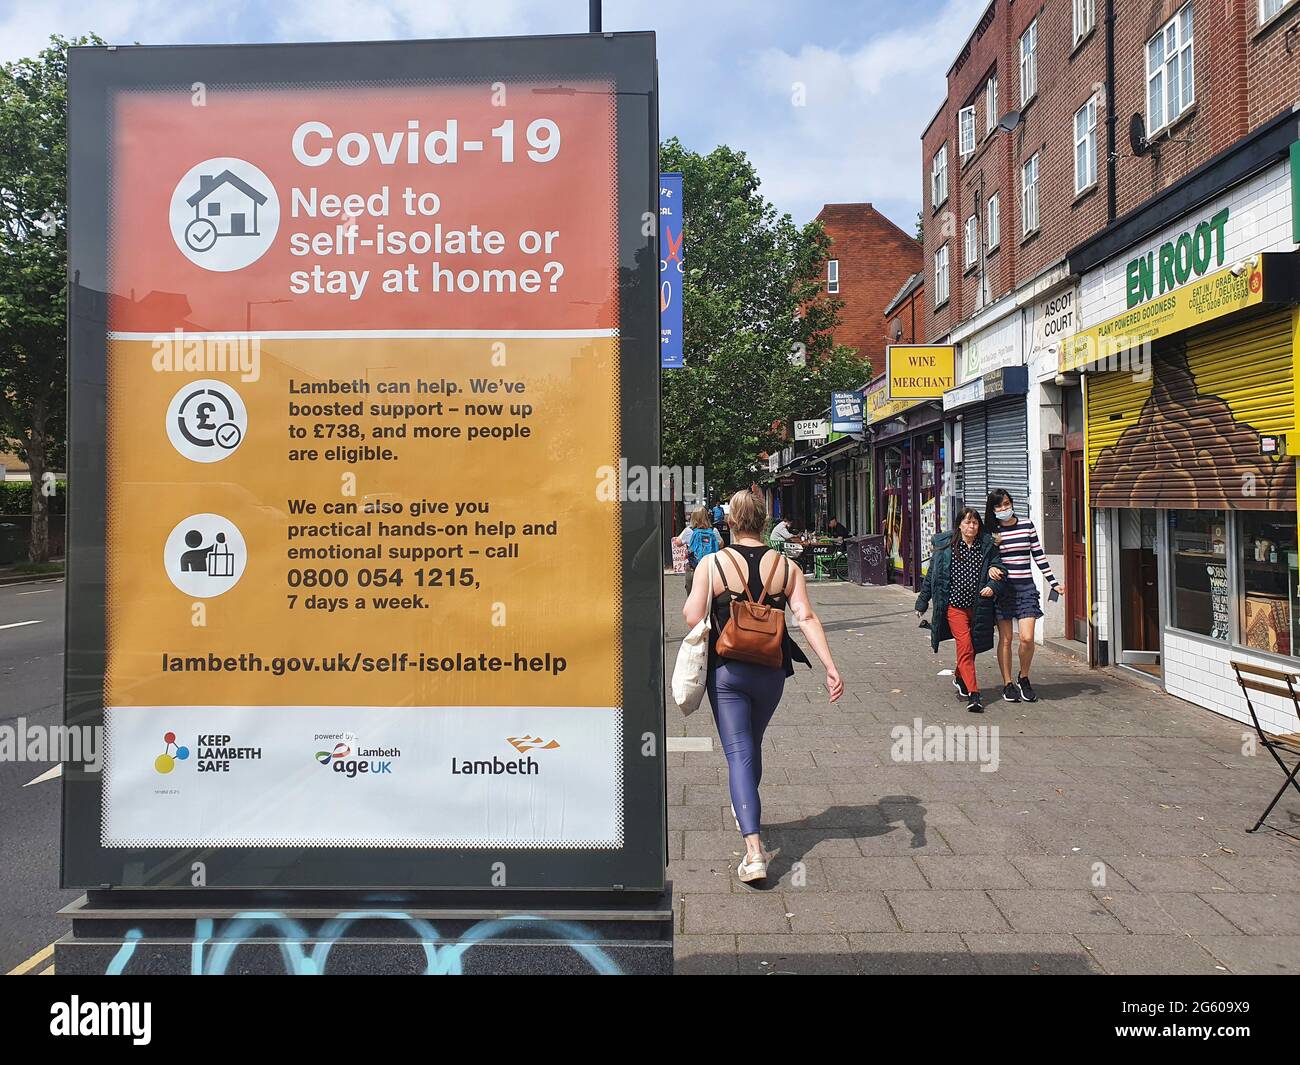 London, UK, 1 July 2021: A poster publicises financial support available in Lambeth for people needing to self-isolate. Lambeth is a borough with clusters of the Delta variant and a poor population who may not be able to self-isolate without financial help. As the UKs number of new cases has risen higher that all of Europe combined, concerns remain about so-called Freedom Day on 19 July. Anna Watson/Alamy Live News Stock Photo